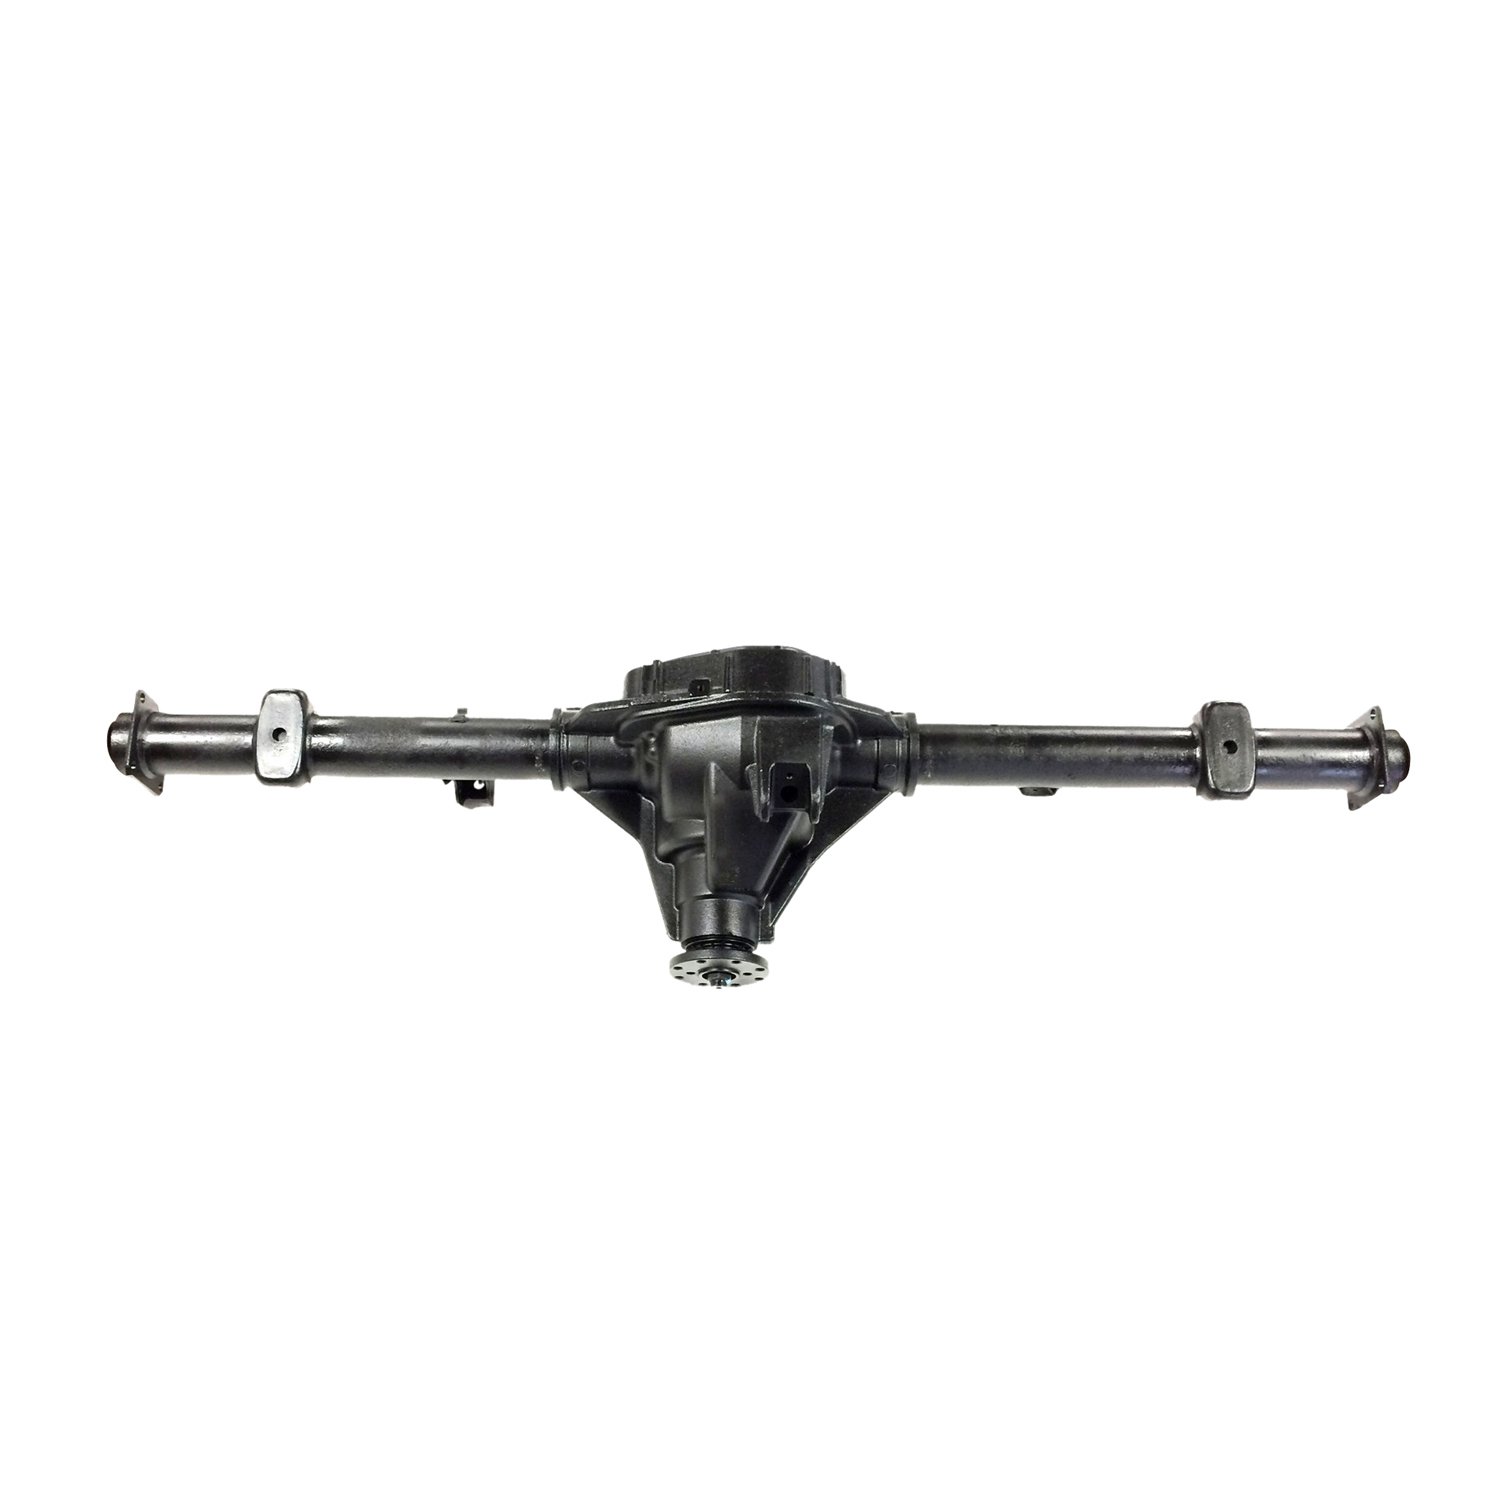 Remanufactured Axle Assy for 9.75" 99-00 F150 3.55 , Rear Disc, Posi LSD *Check Tag*